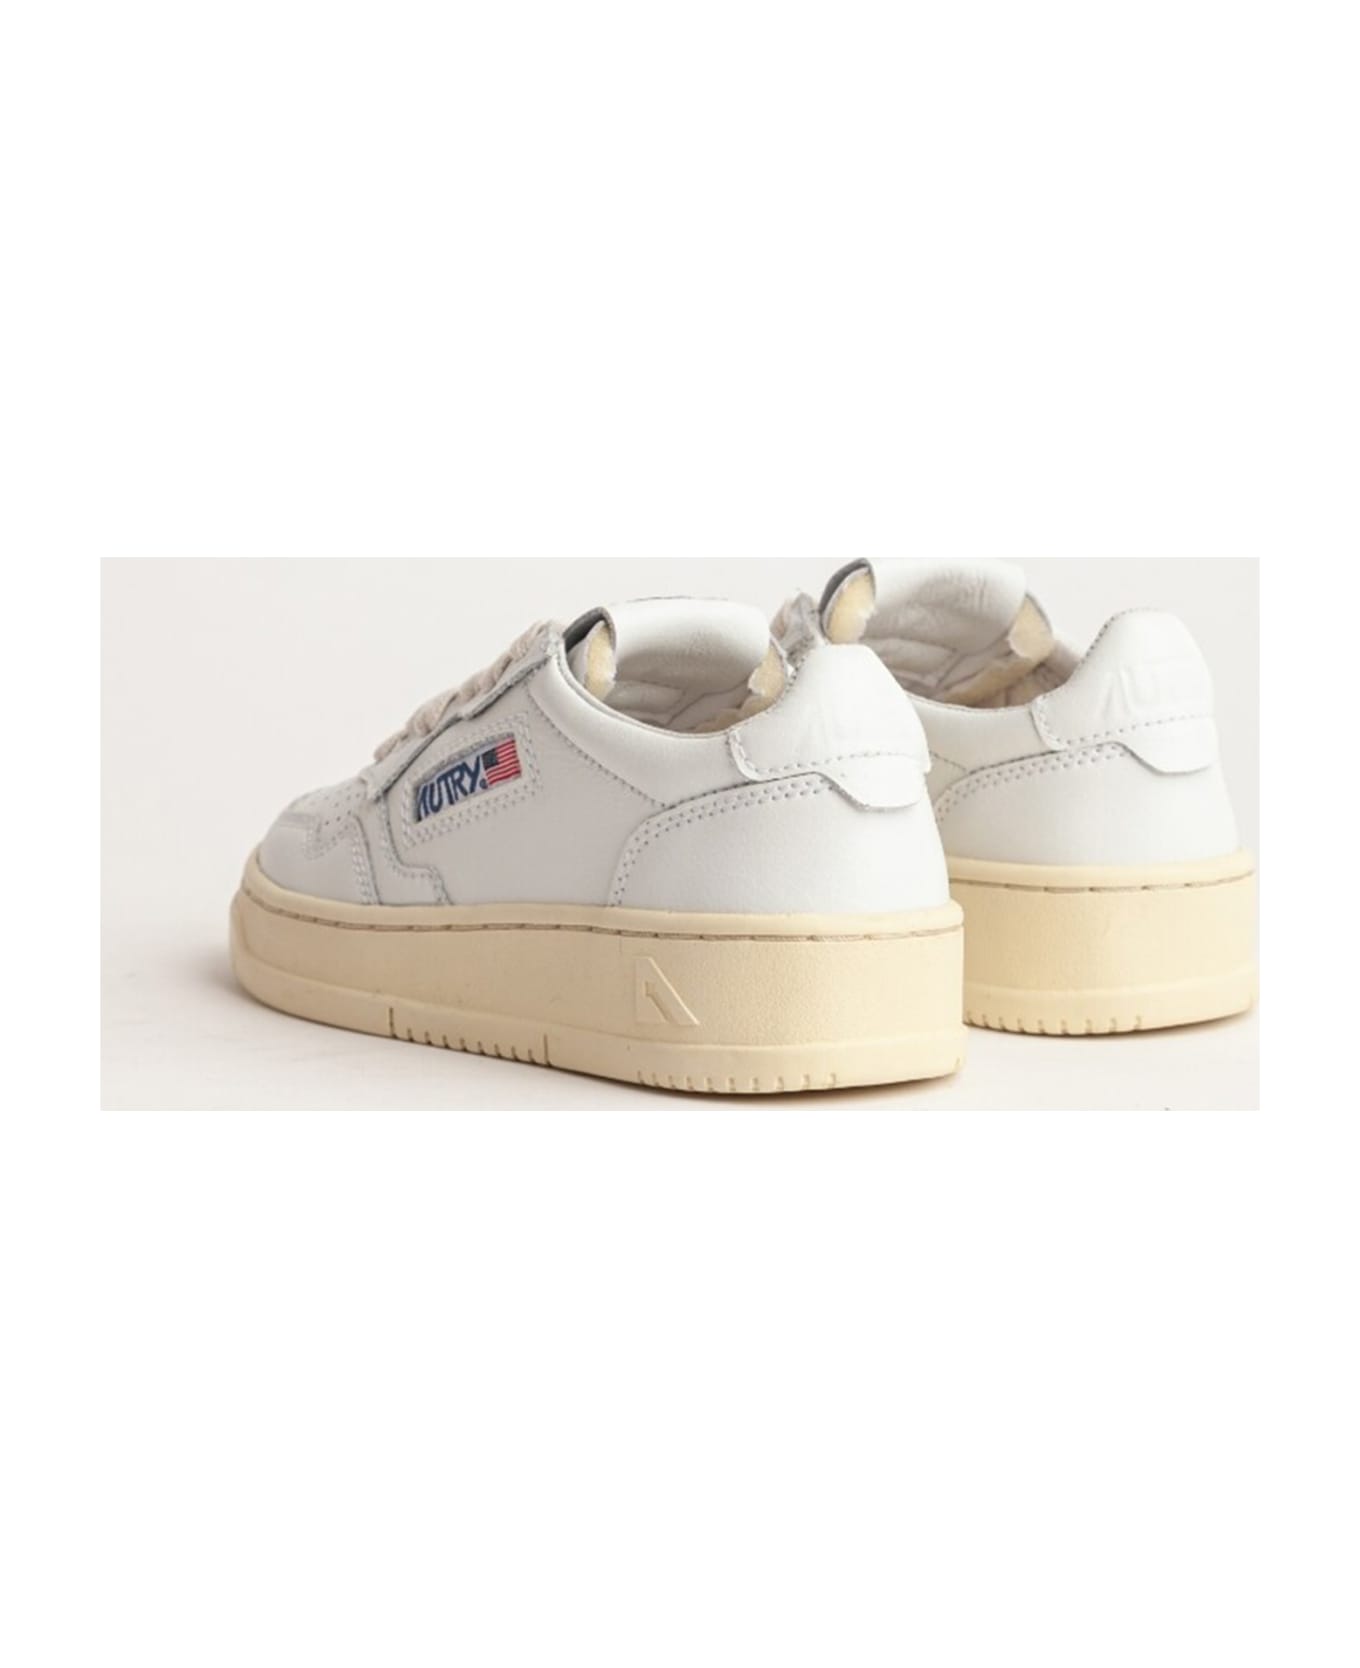 Autry Low Top Sneakers - WHITE シューズ